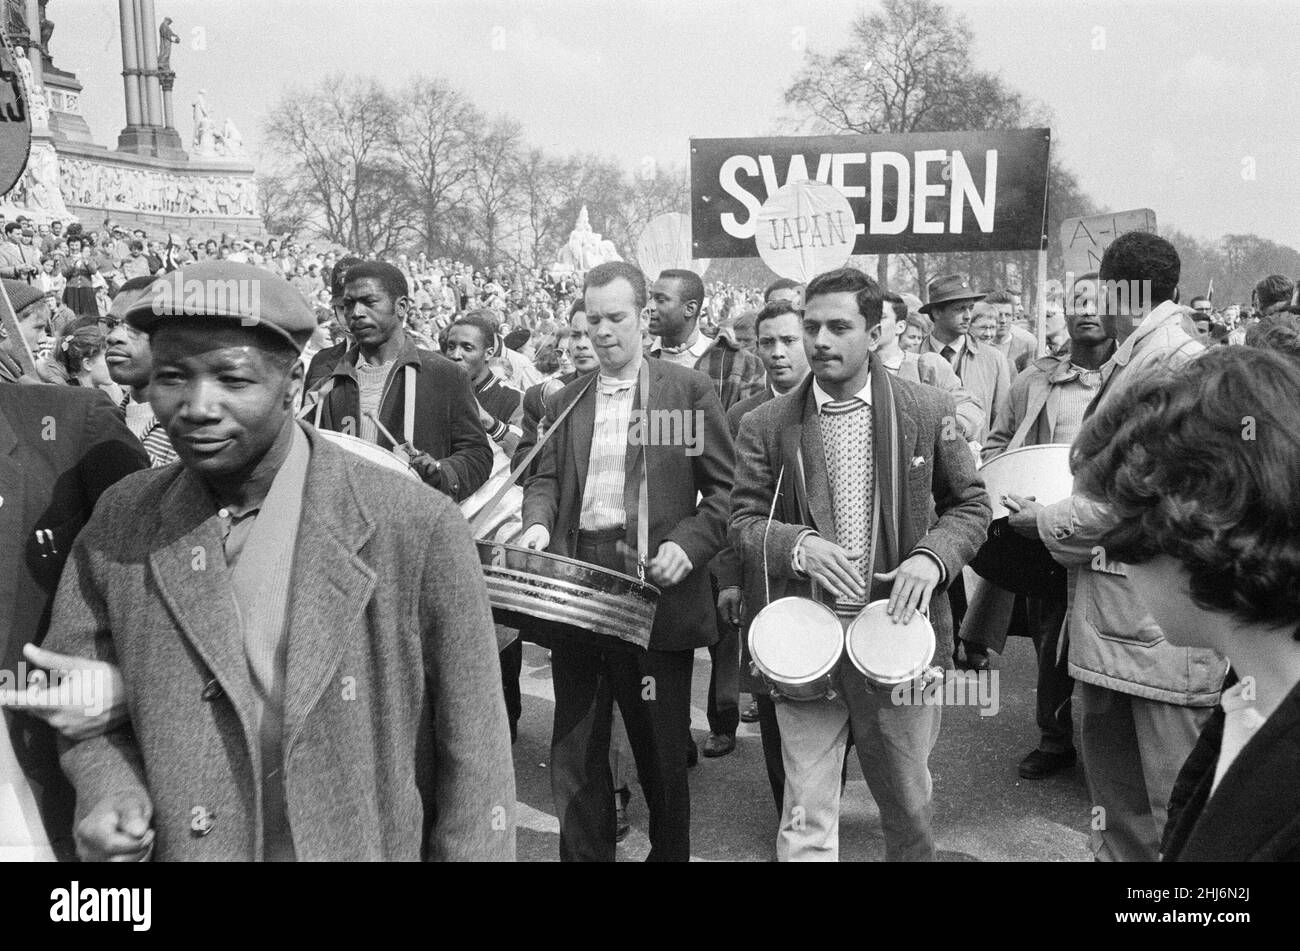 Ban The Bomb movement four day march from the Atomic Weapons Research Establishment at Aldermaston, Berkshire, to Trafalgar Square, London, Monday 30th March 1959. Our Picture Shows ... West Indies, Japanese and Swedish Contingents in the anti-H bomb march.¿The second annual Easter march was organised by the Campaign for Nuclear Disarmament.  Tens of thousands of people marked the end of the Aldermaston march with a rally in central London. This was the largest demonstration London had seen in the 20th Century. Stock Photo